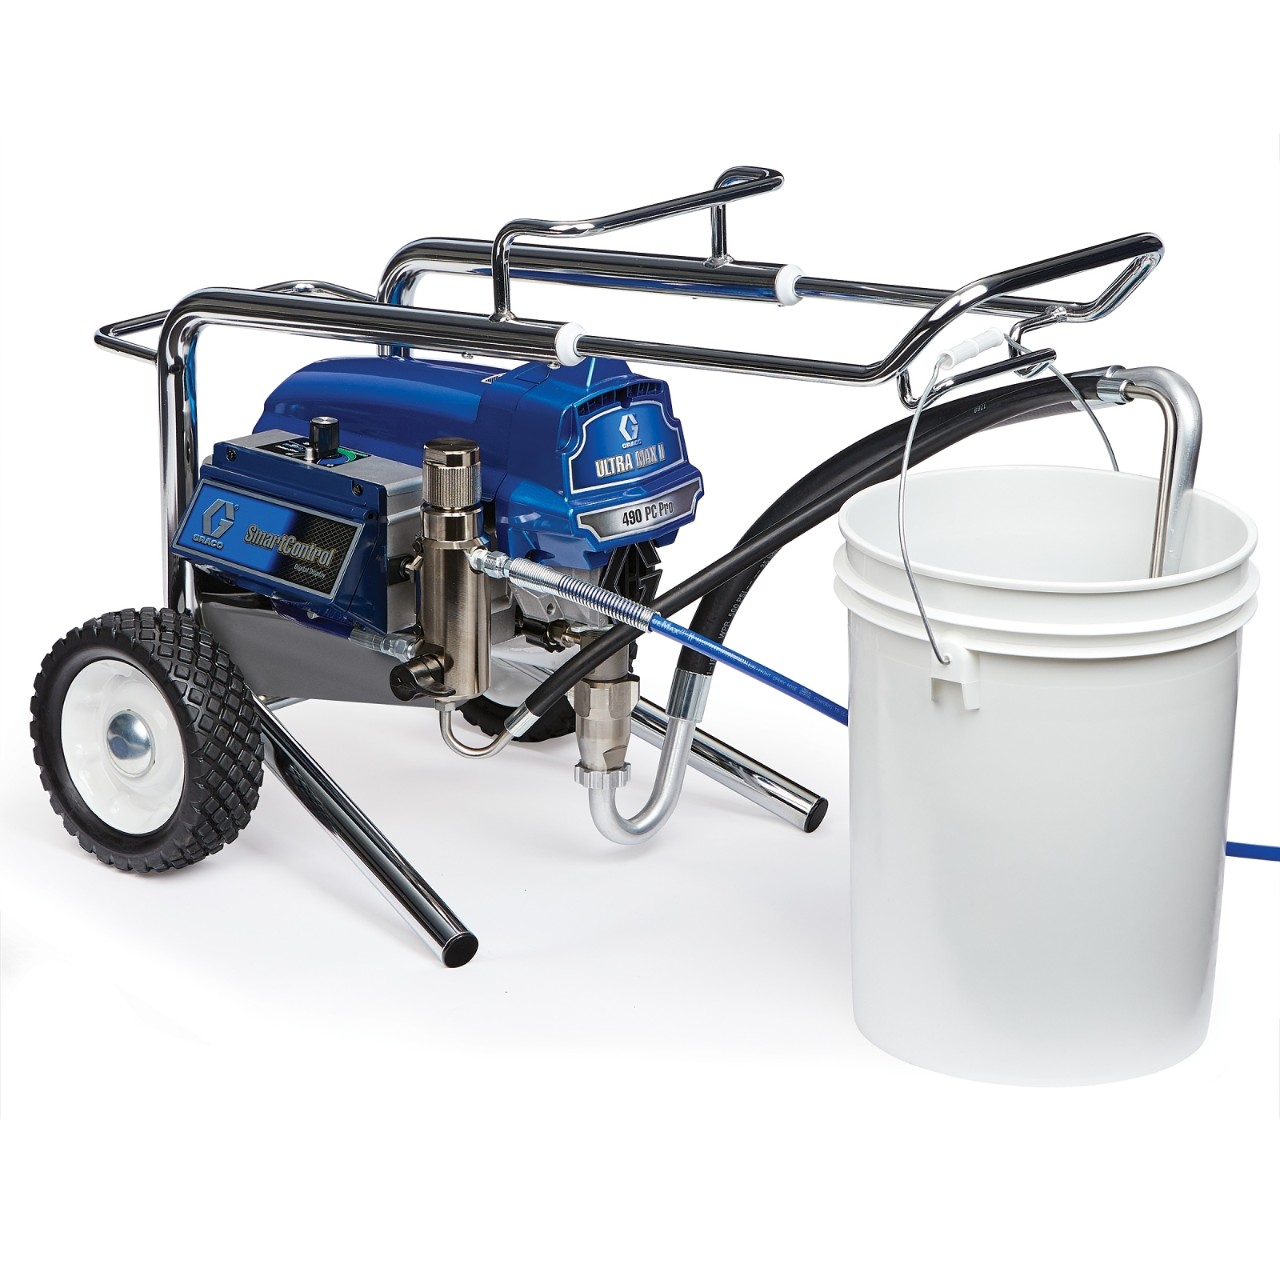 Graco Ultra Max II 490 PC Pro Electric Airless Sprayer, Stand